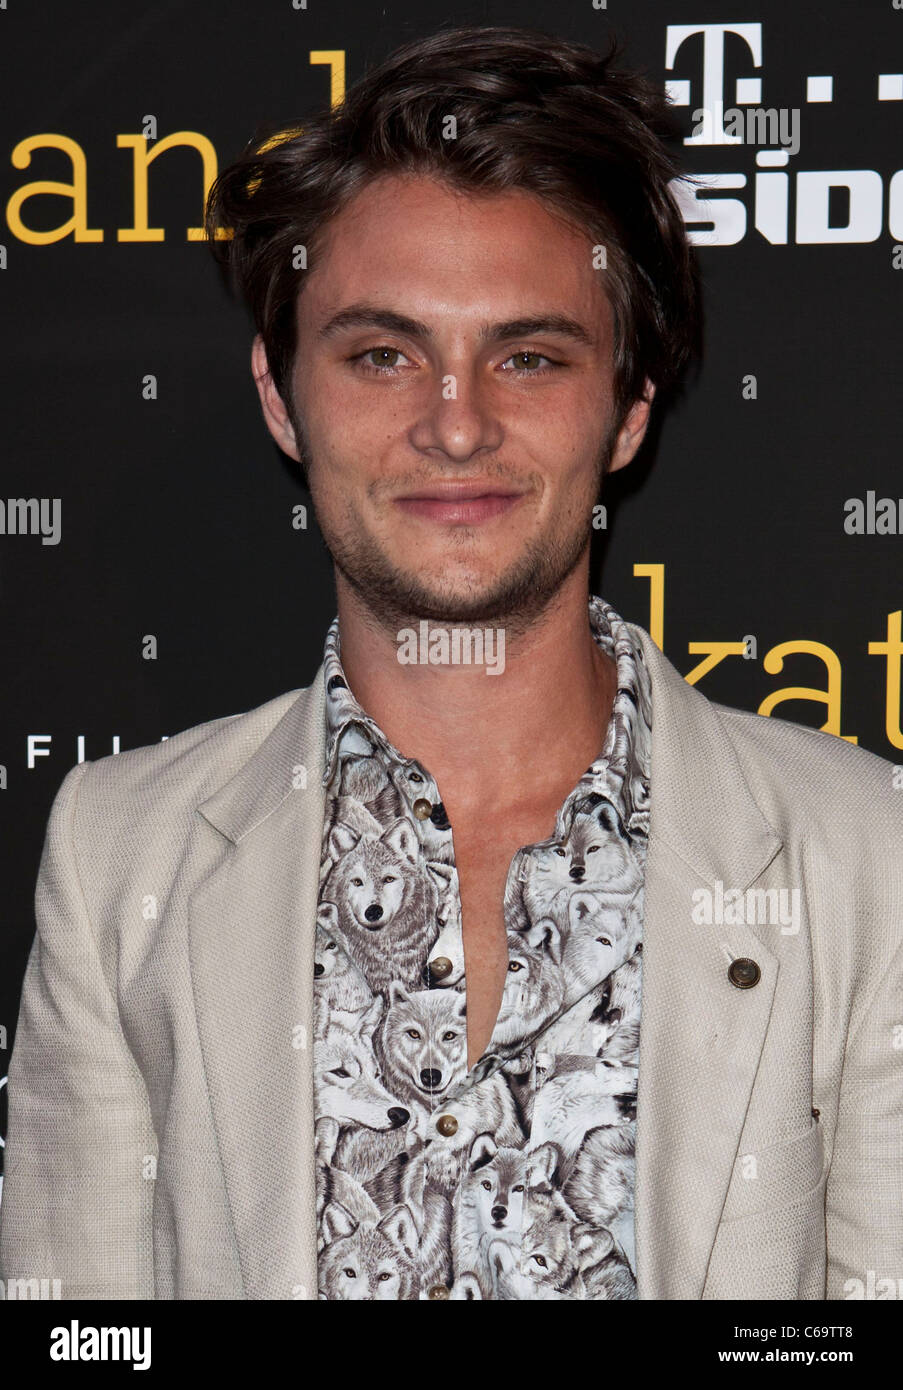 Shiloh Fernandez at arrivals for SKATELAND Los Angeles Premiere, Arclight Theater, Hollywood, CA May 11, 2011. Photo By: Emiley Stock Photo